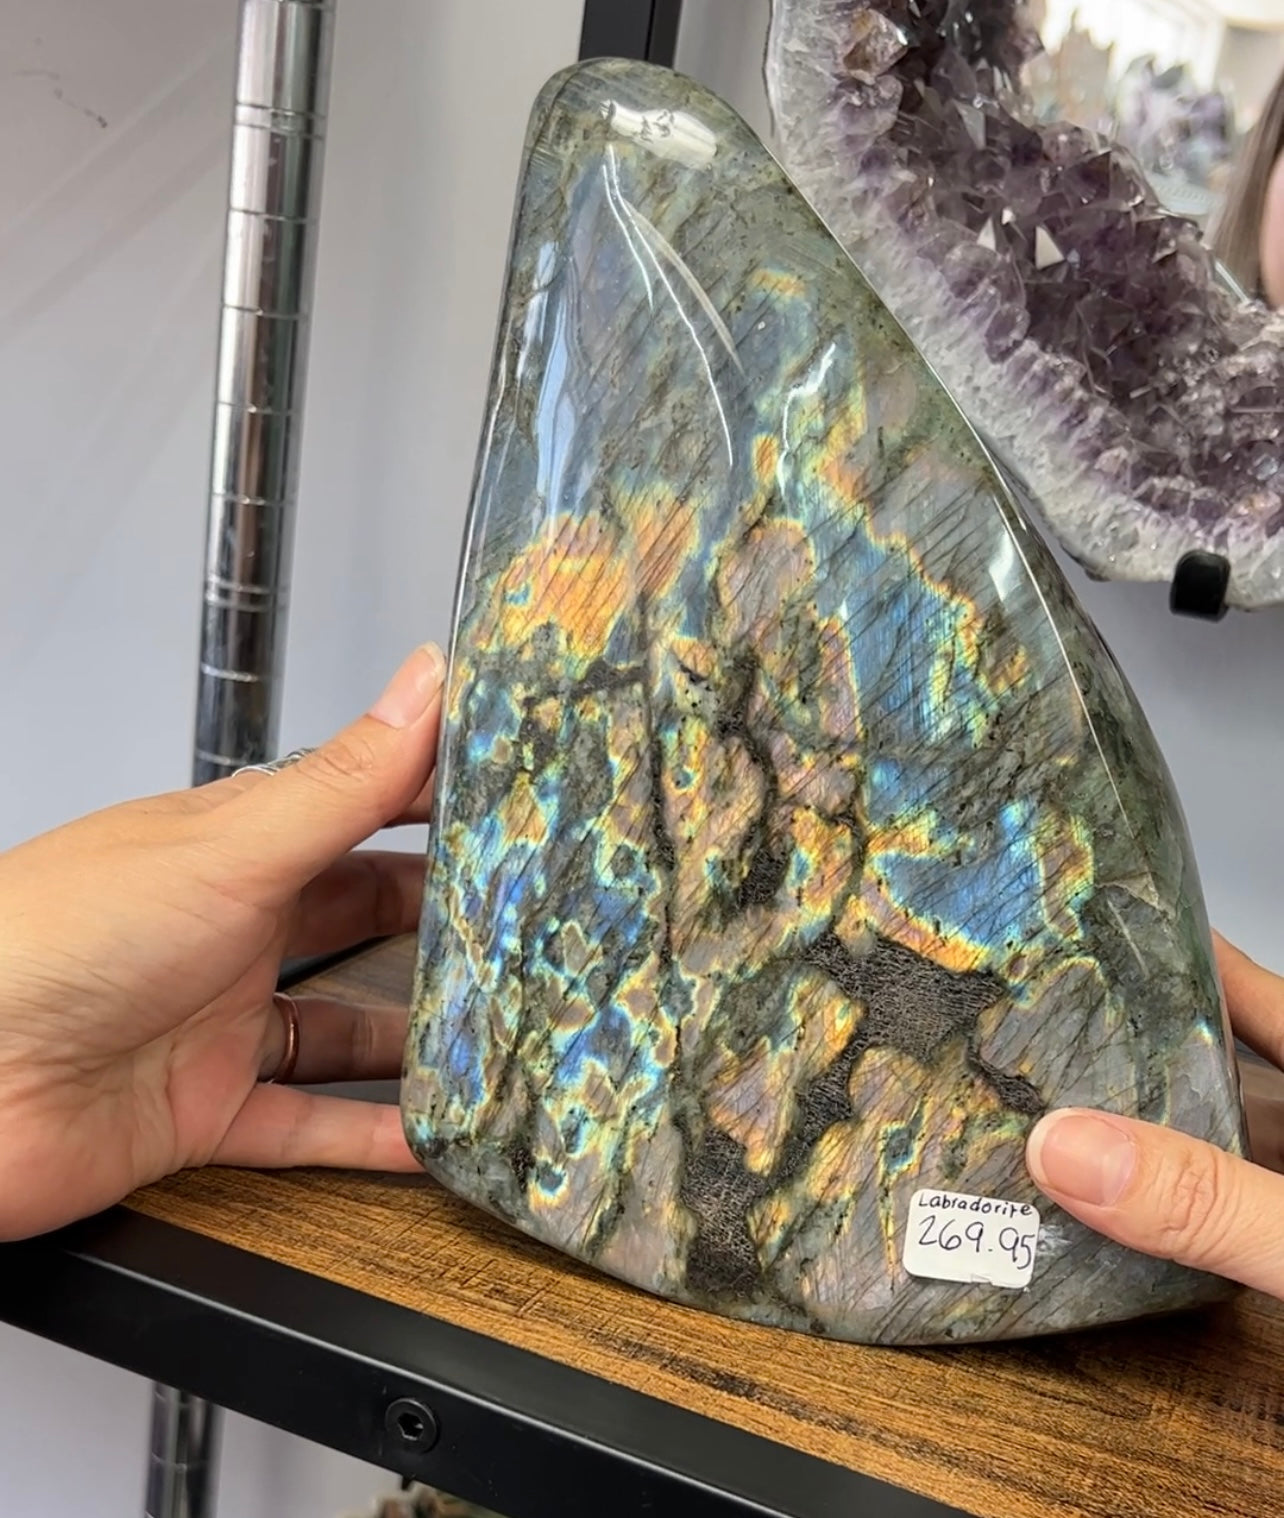 Labradorite featured on our Social Media